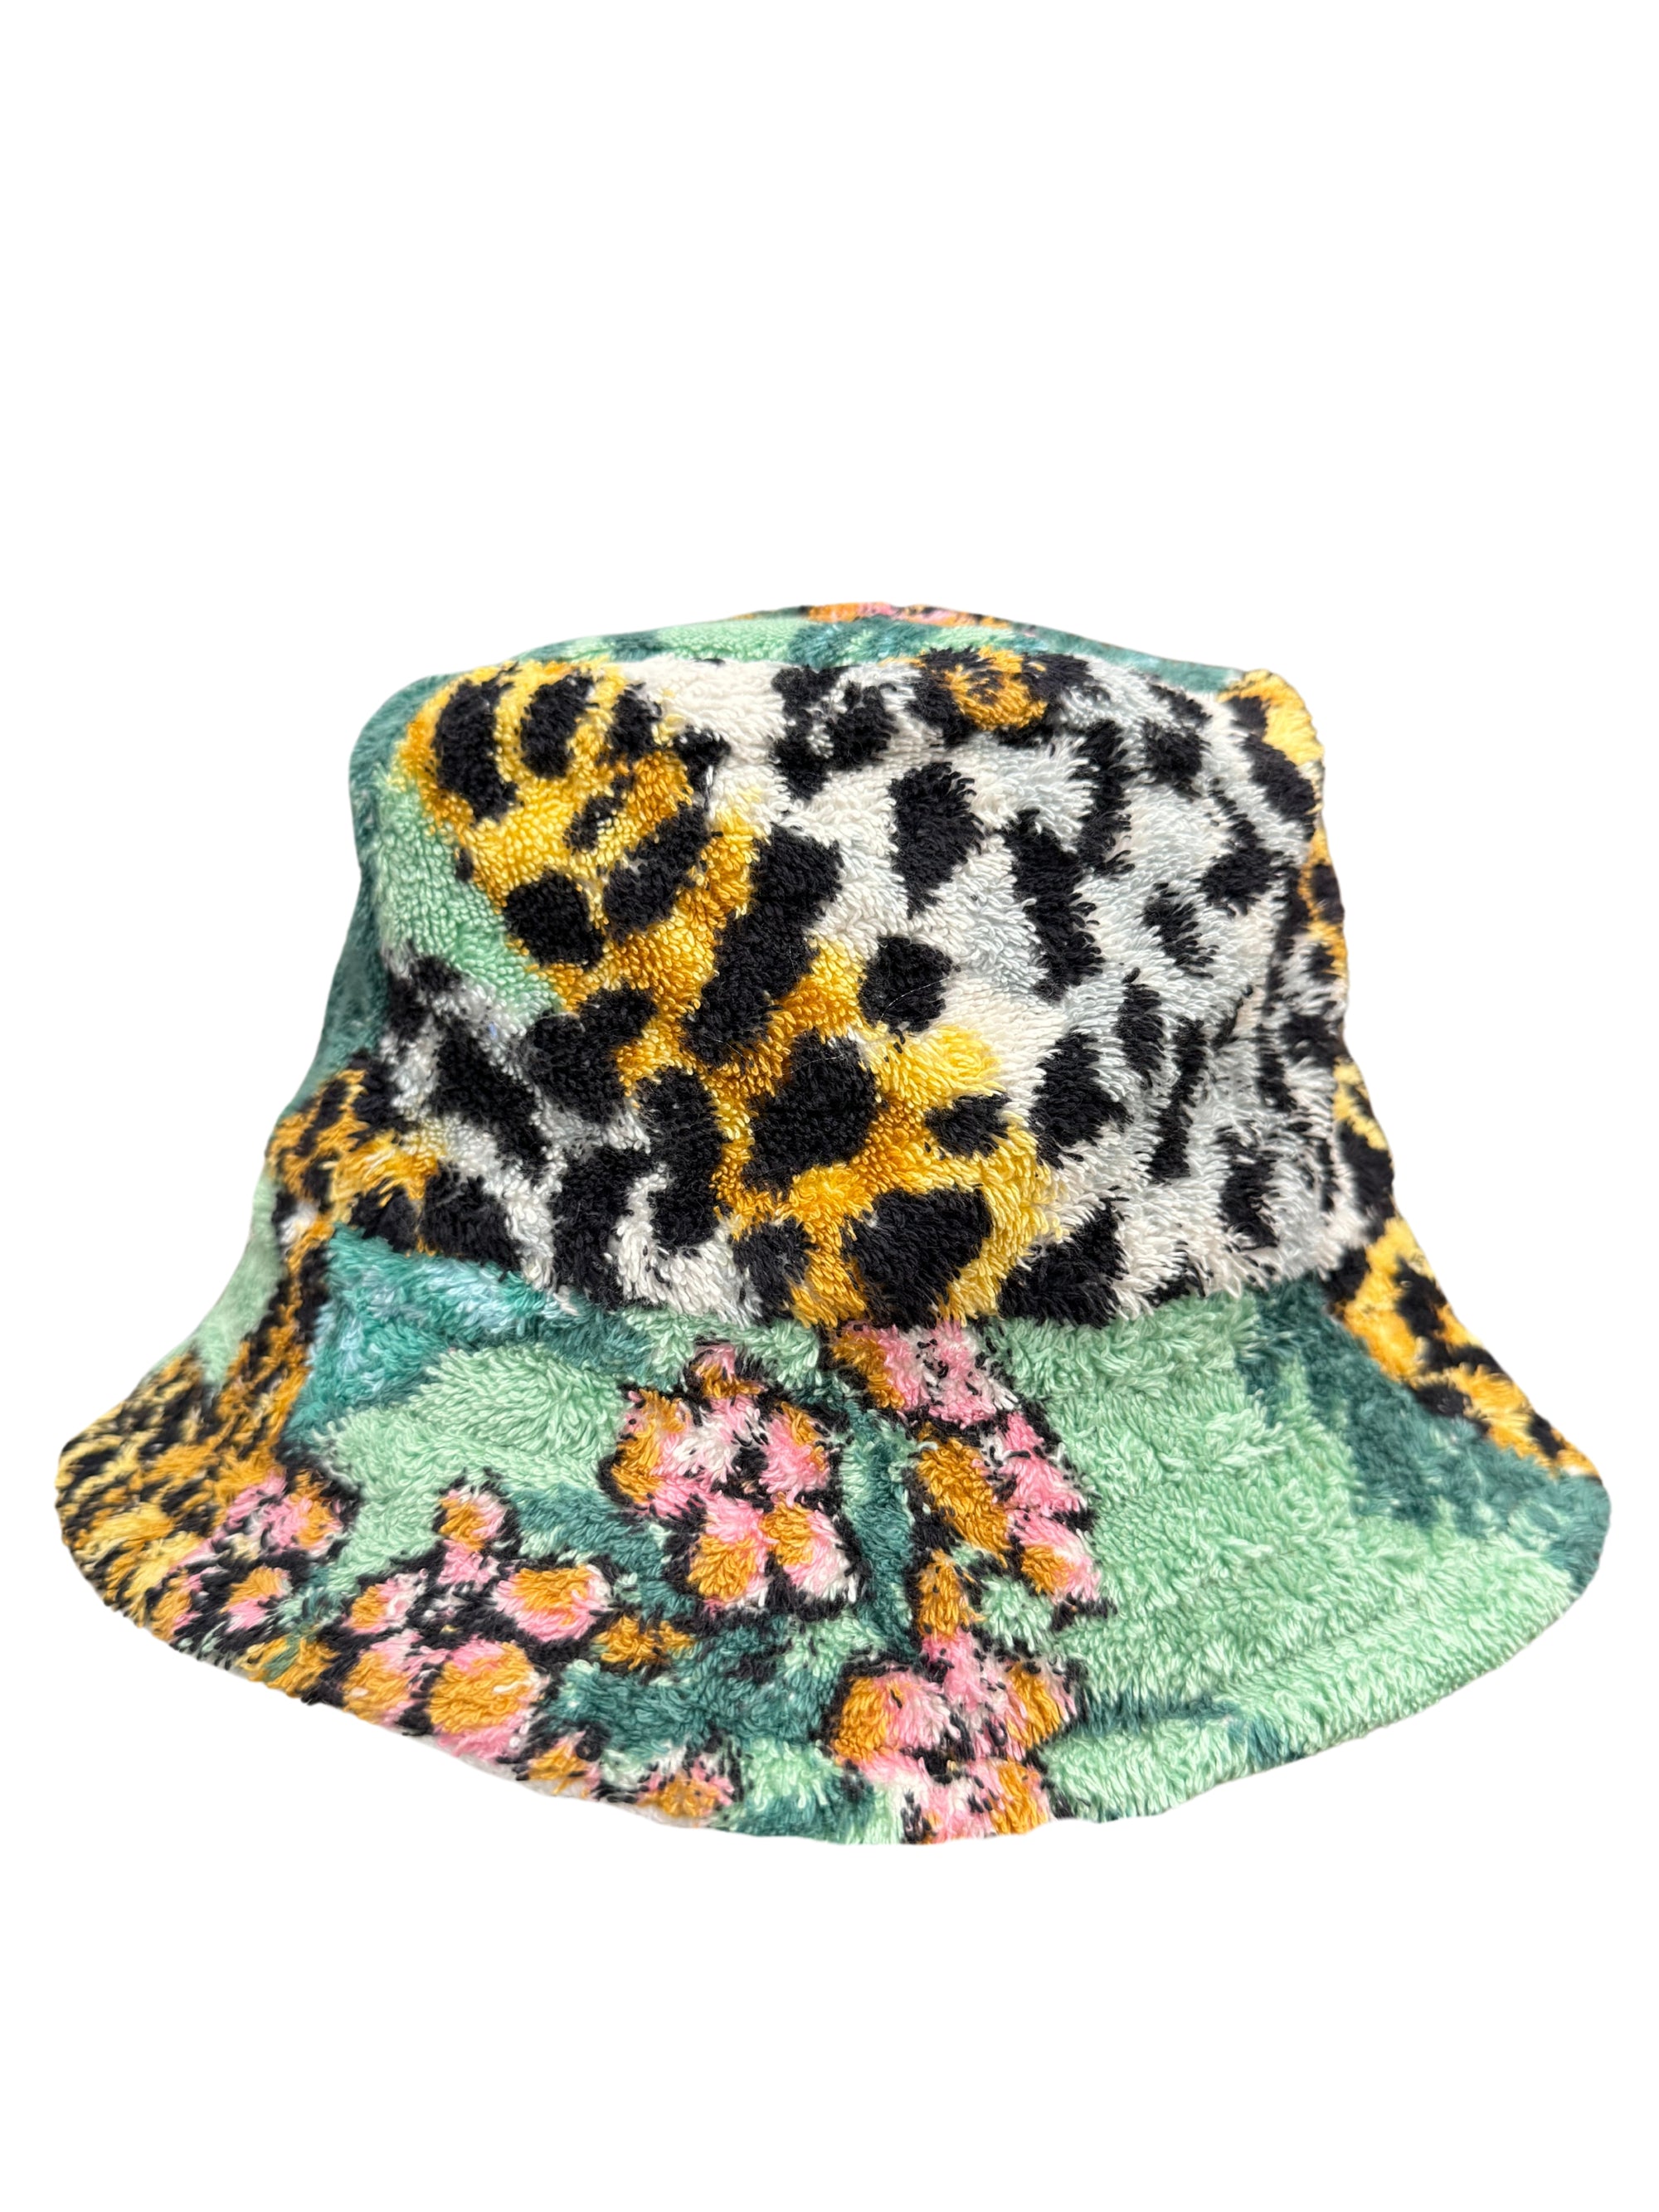 The Up-Cycled Bucket Hat